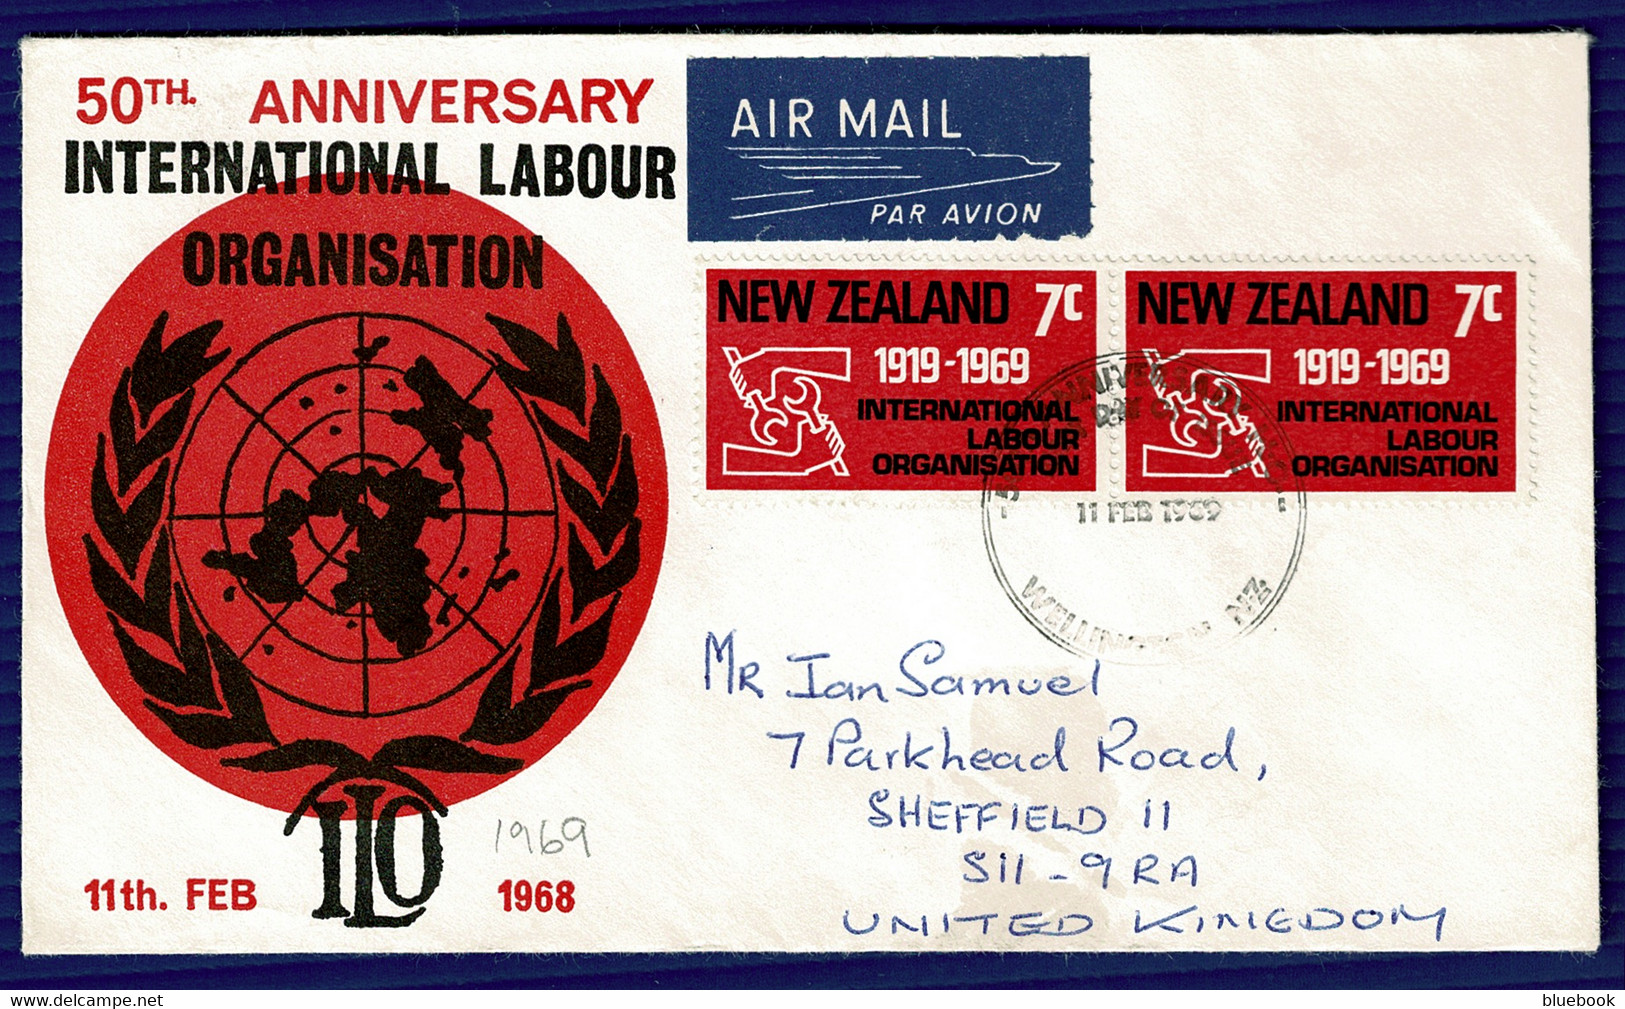 Ref 1577 - New Zealand - 1969 Reprinted Cover With Incorrect Date Of 1968 - 14c Rate To UK - Covers & Documents